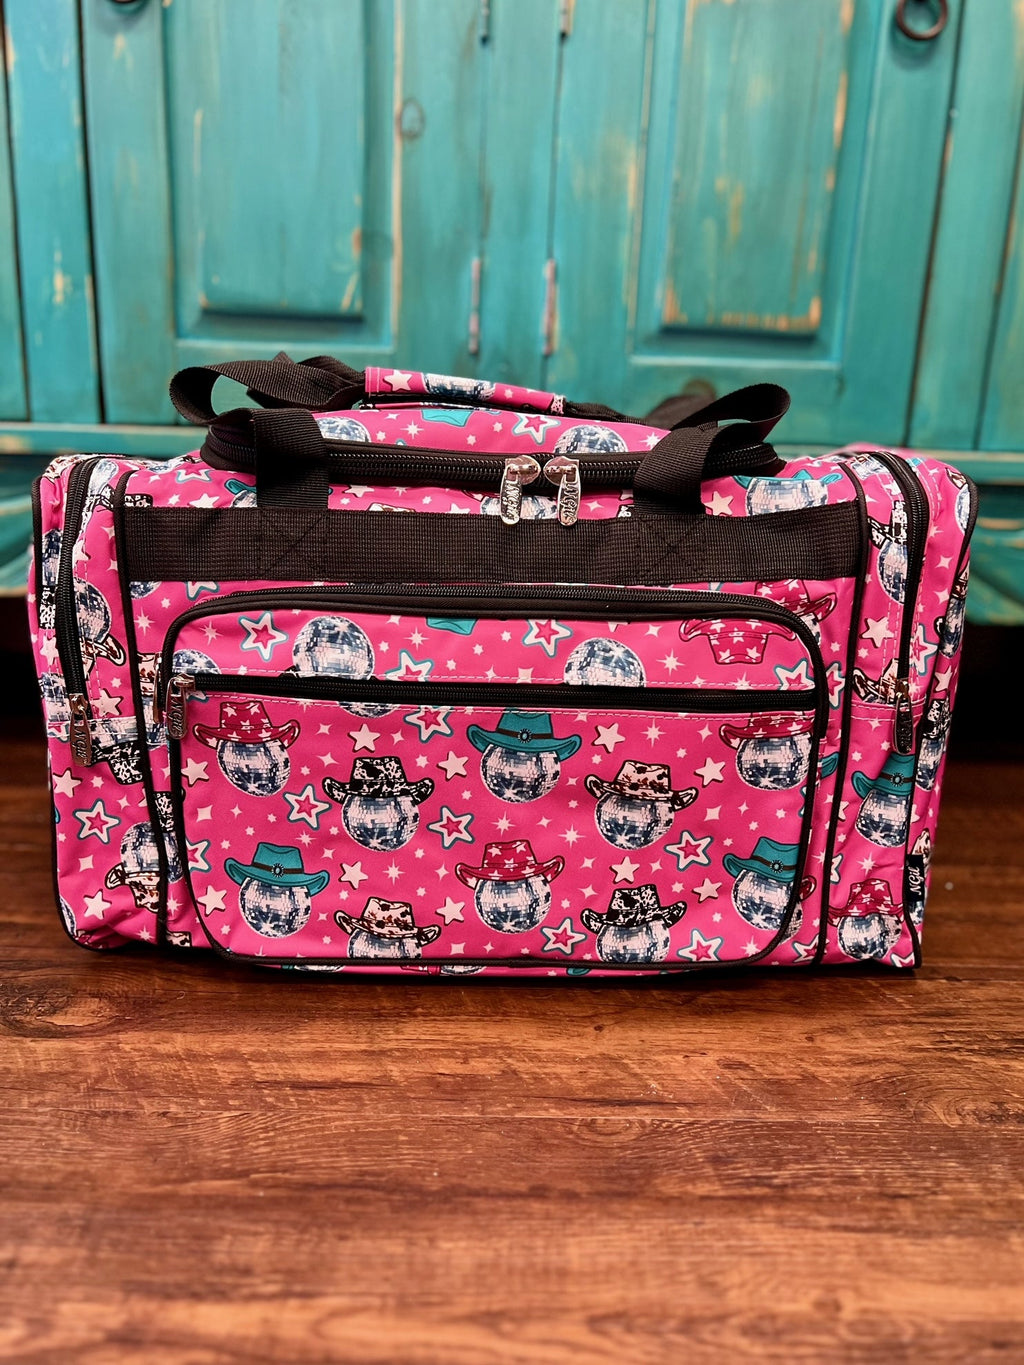 The Disco Cowgirl Small Duffle Bag | gussieduponline